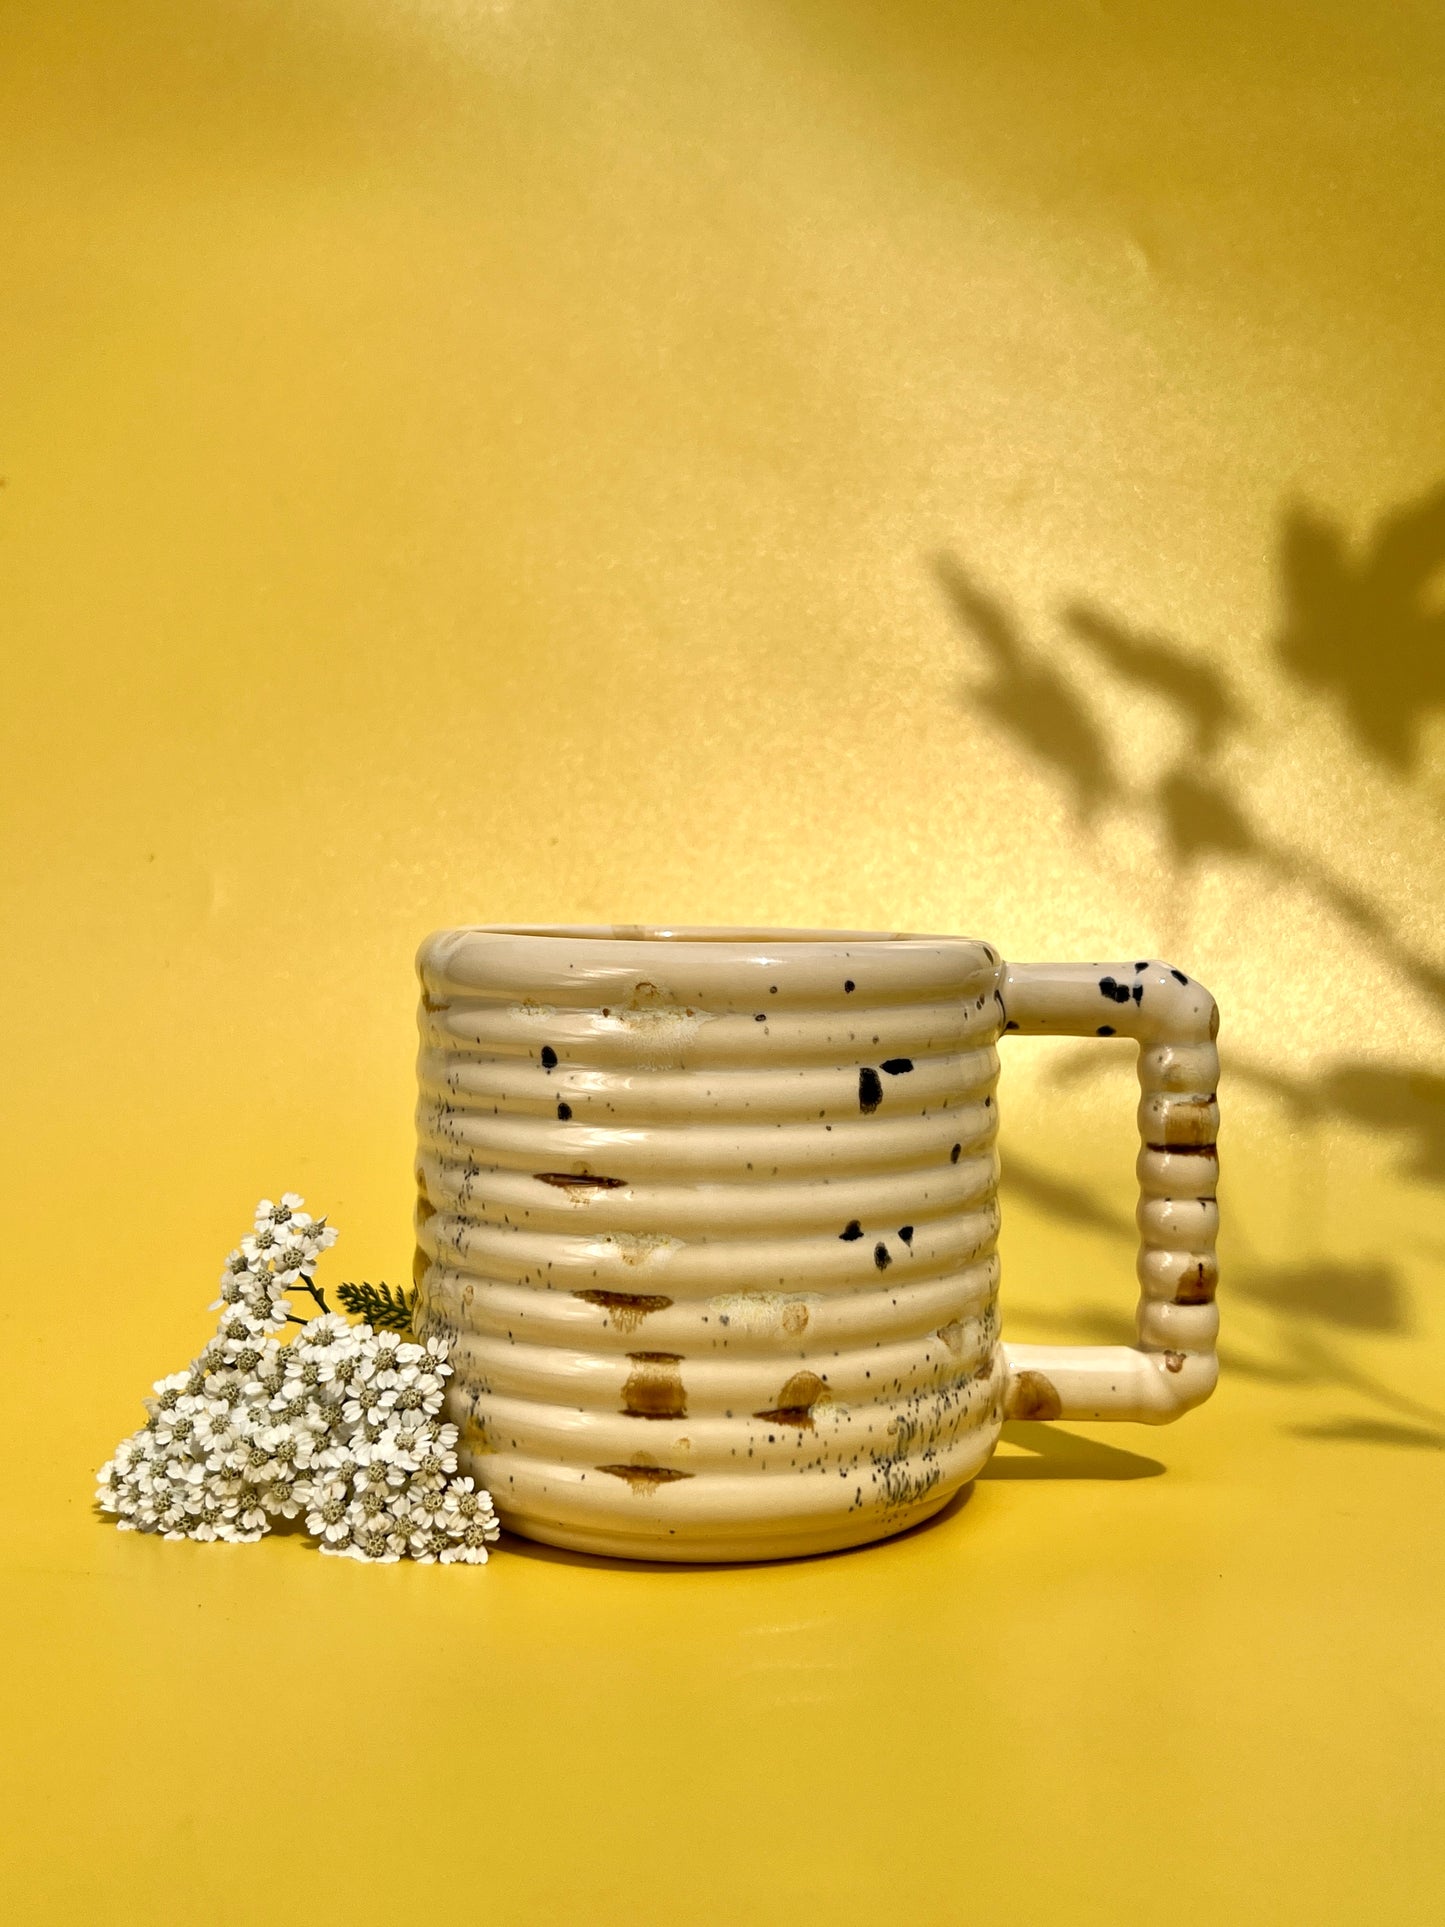 ♥PREORDER♥ Gozarian Mug with Horizontal Texture in Calico